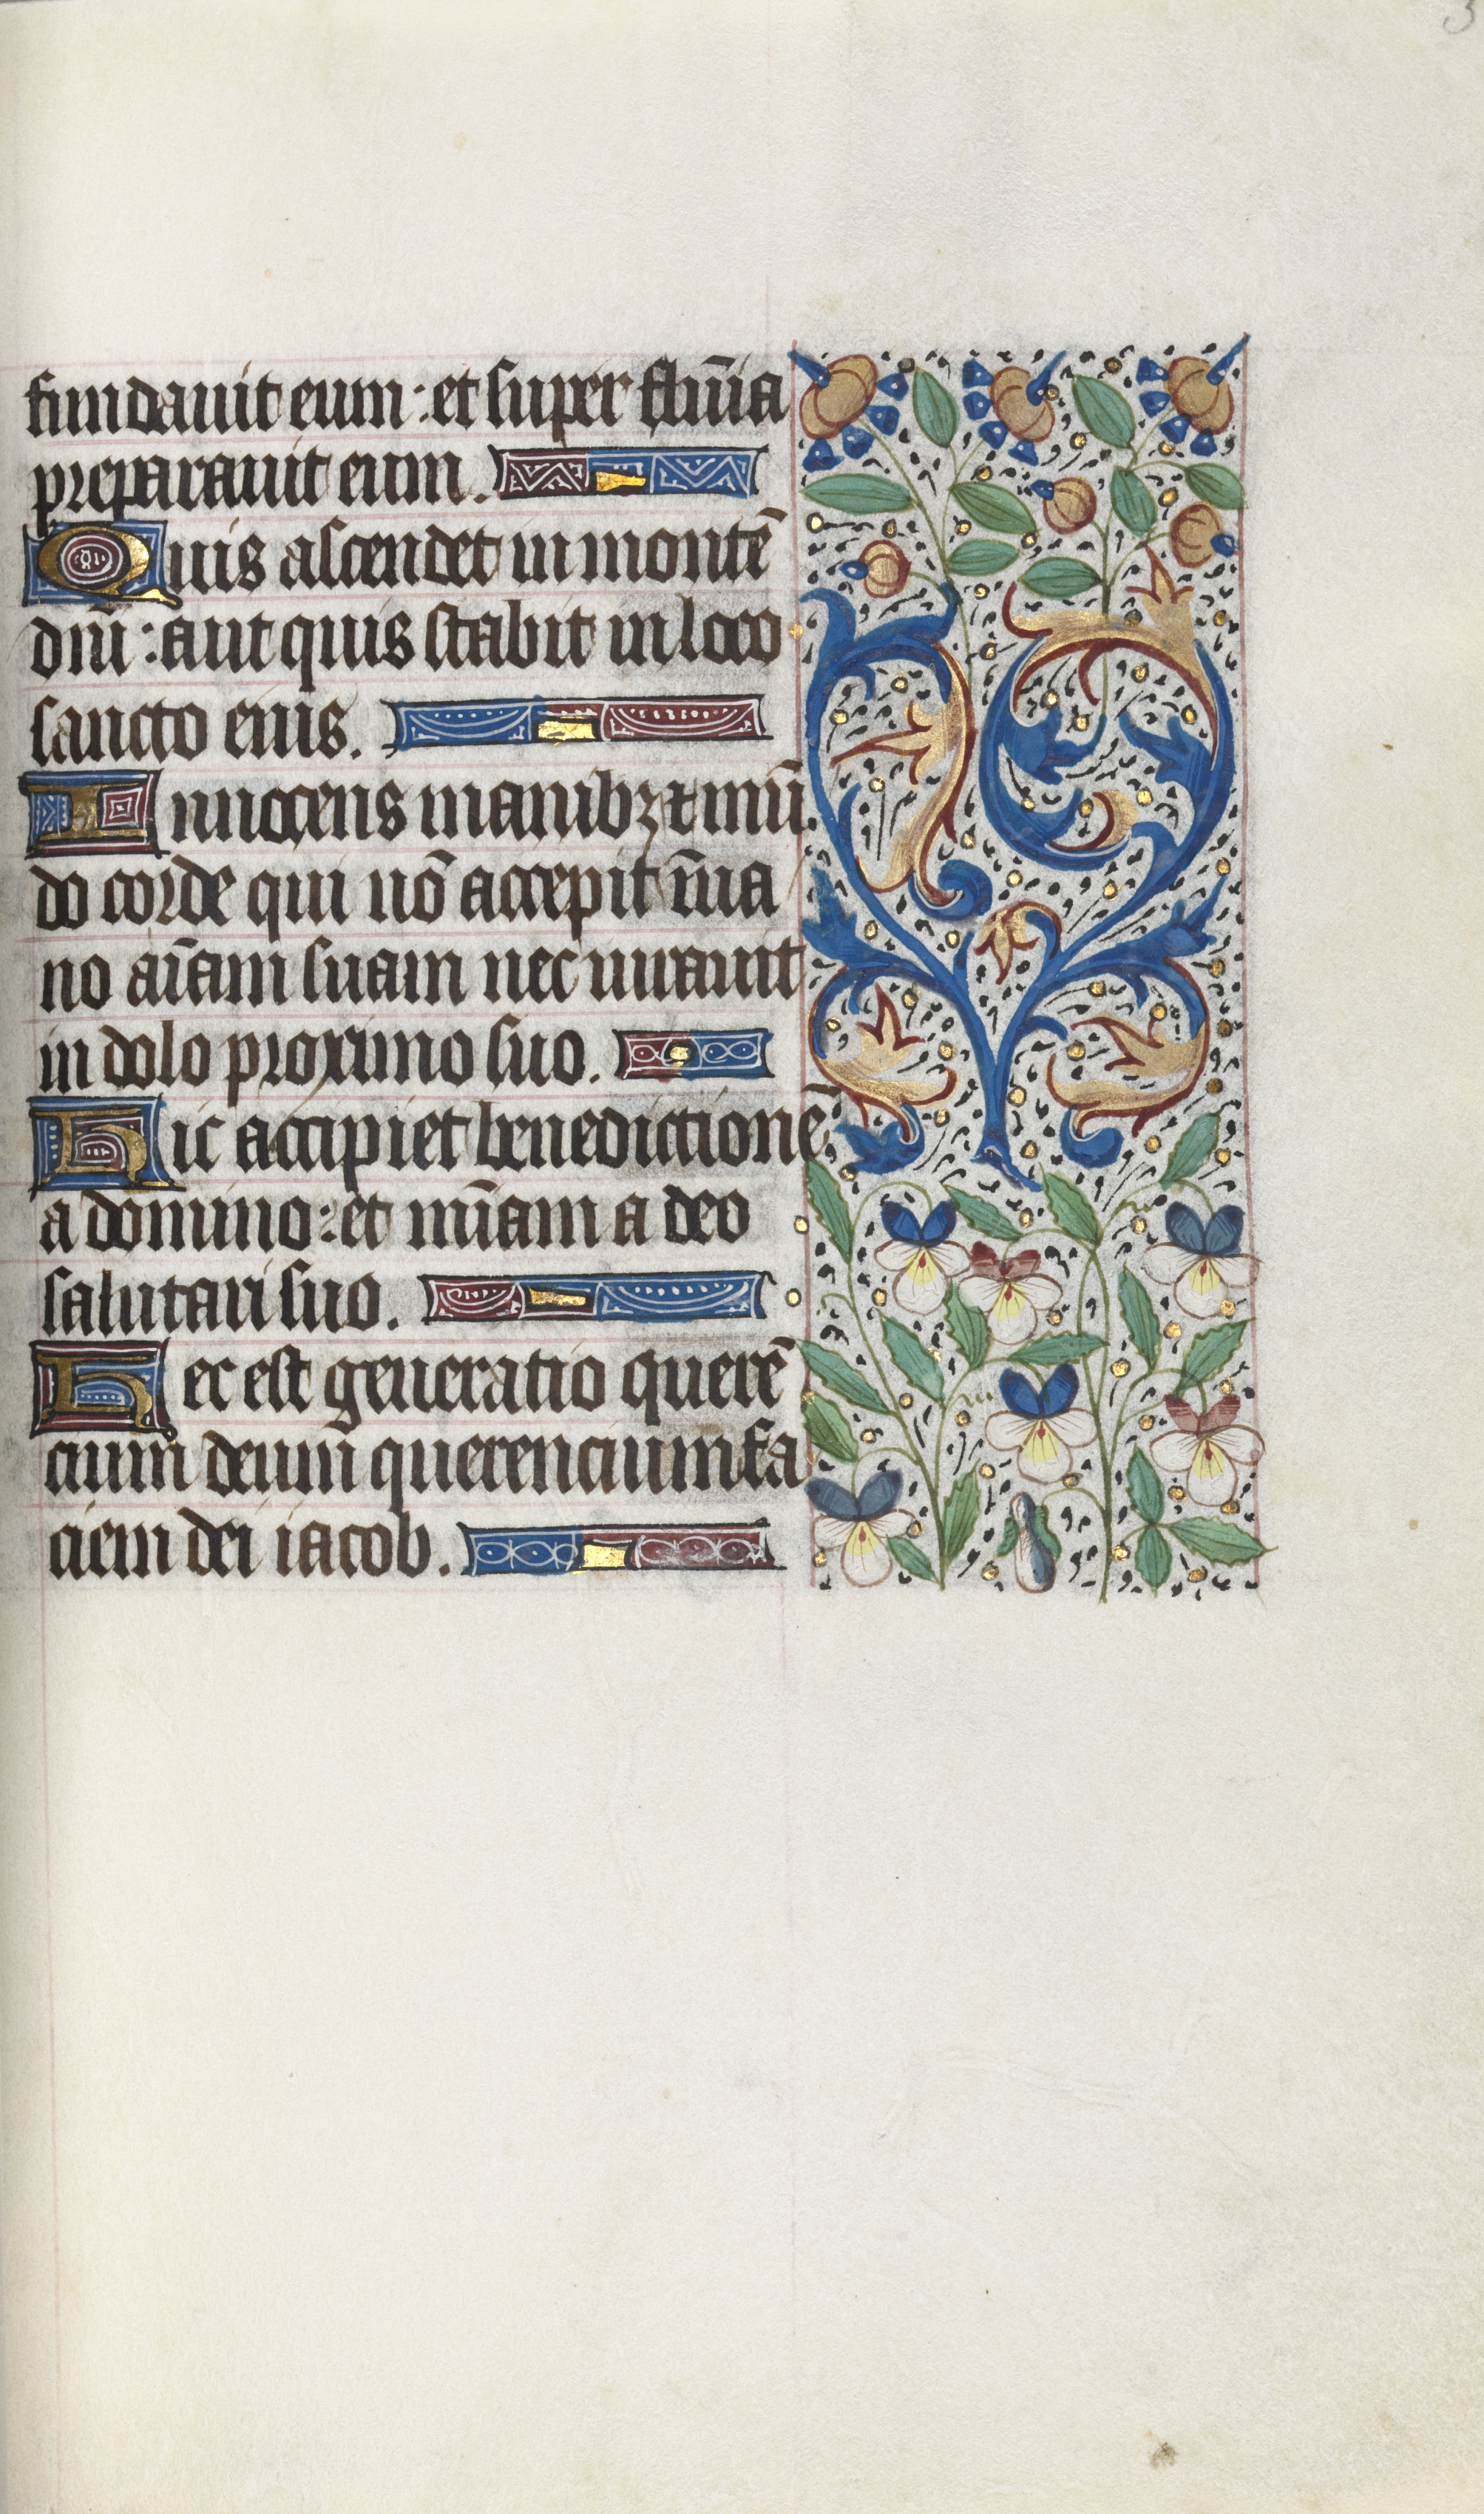 Book of Hours (Use of Rouen): fol. 34r